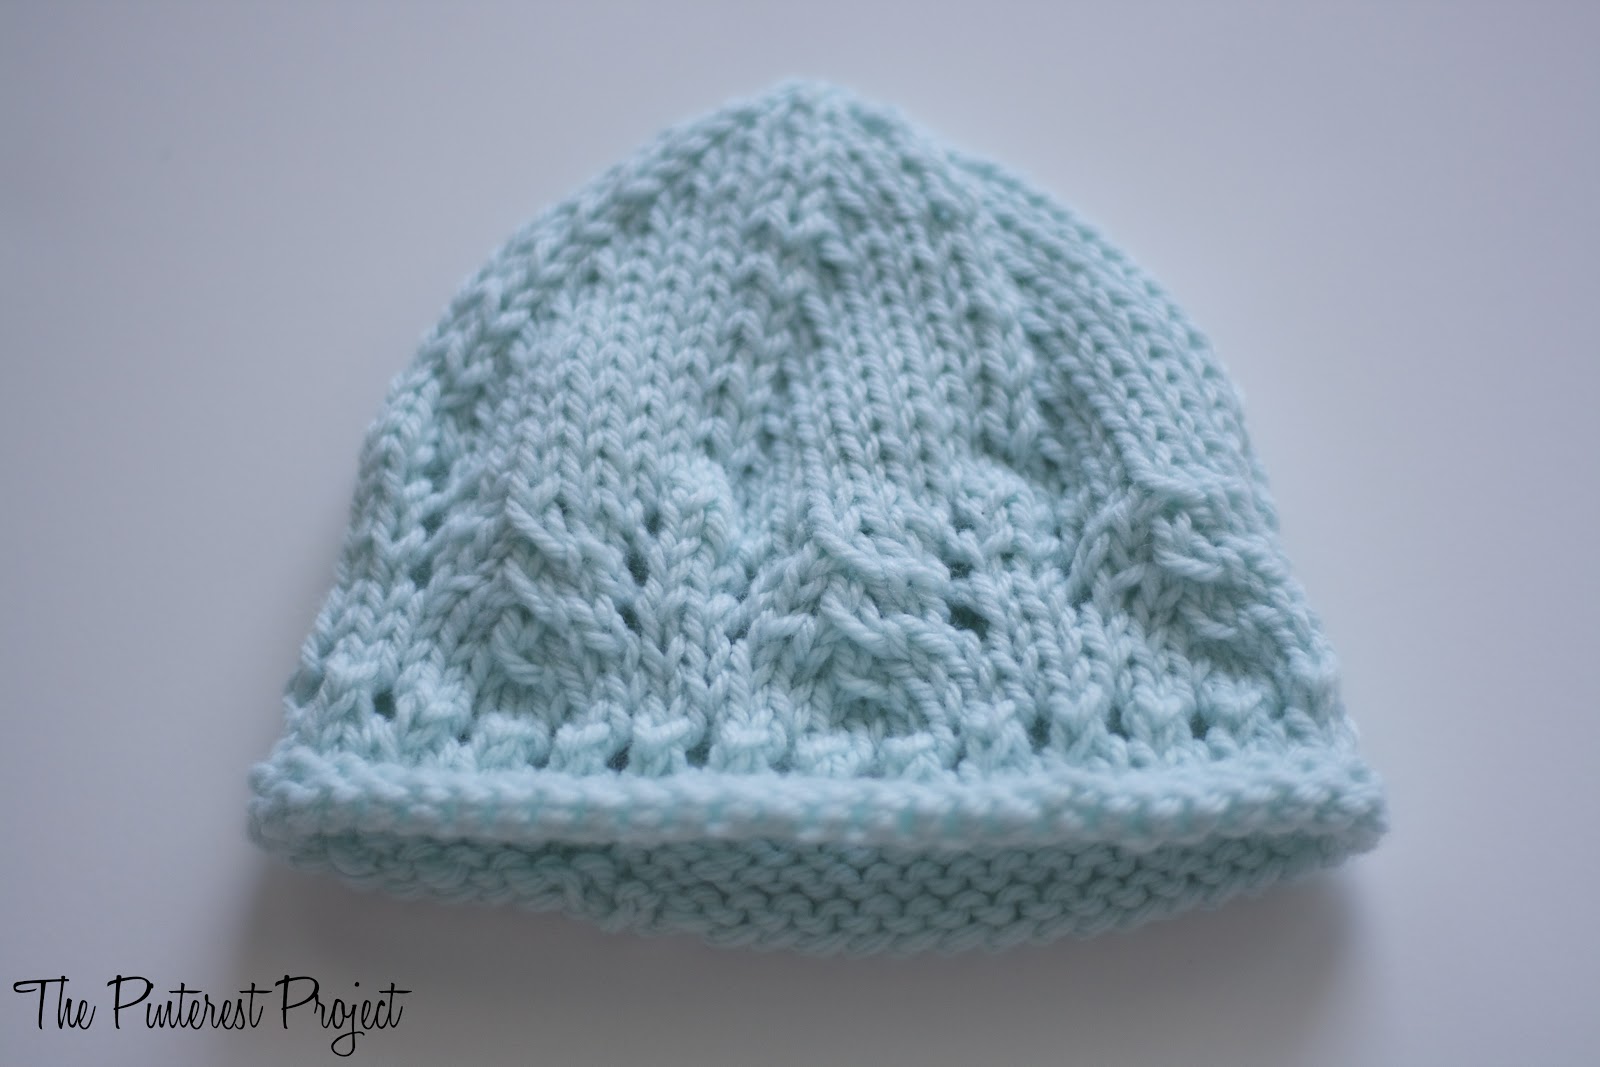 Some Knit Baby Hats | The Pinterest Project